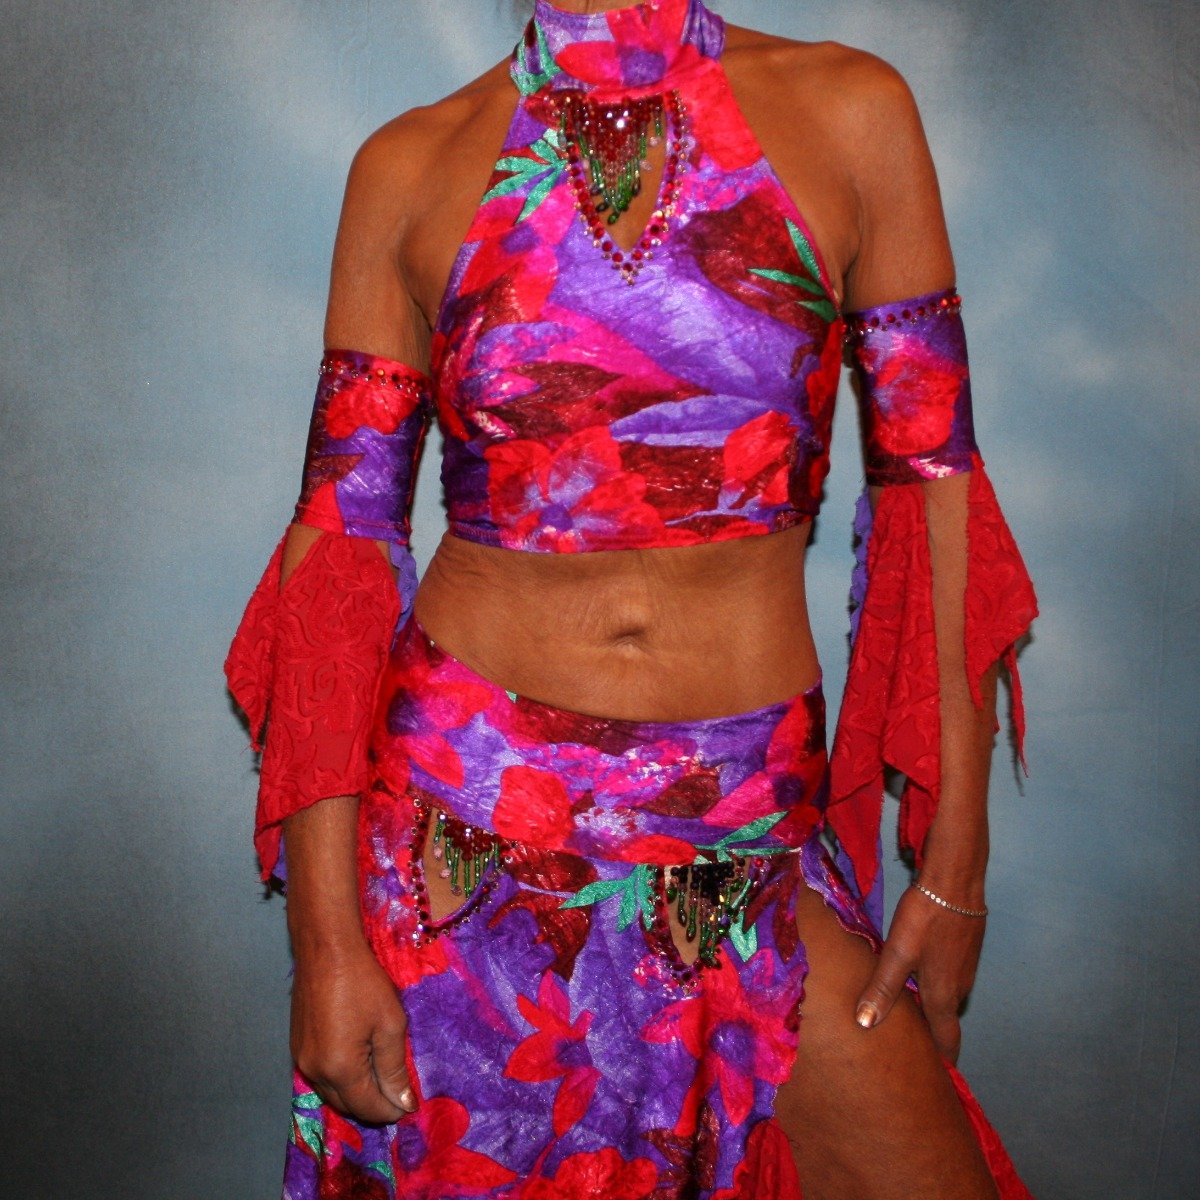 Crystal's Creations close up view of Red & purple tropical print 2 piece Latin/rhythm dress was created in tropical print lycra in deep reds,purples & a touch of green, along with accents of deep red textured chiffon scarf cut flounces & purple stretch lace petal cut flounces on skirt and arm bands,